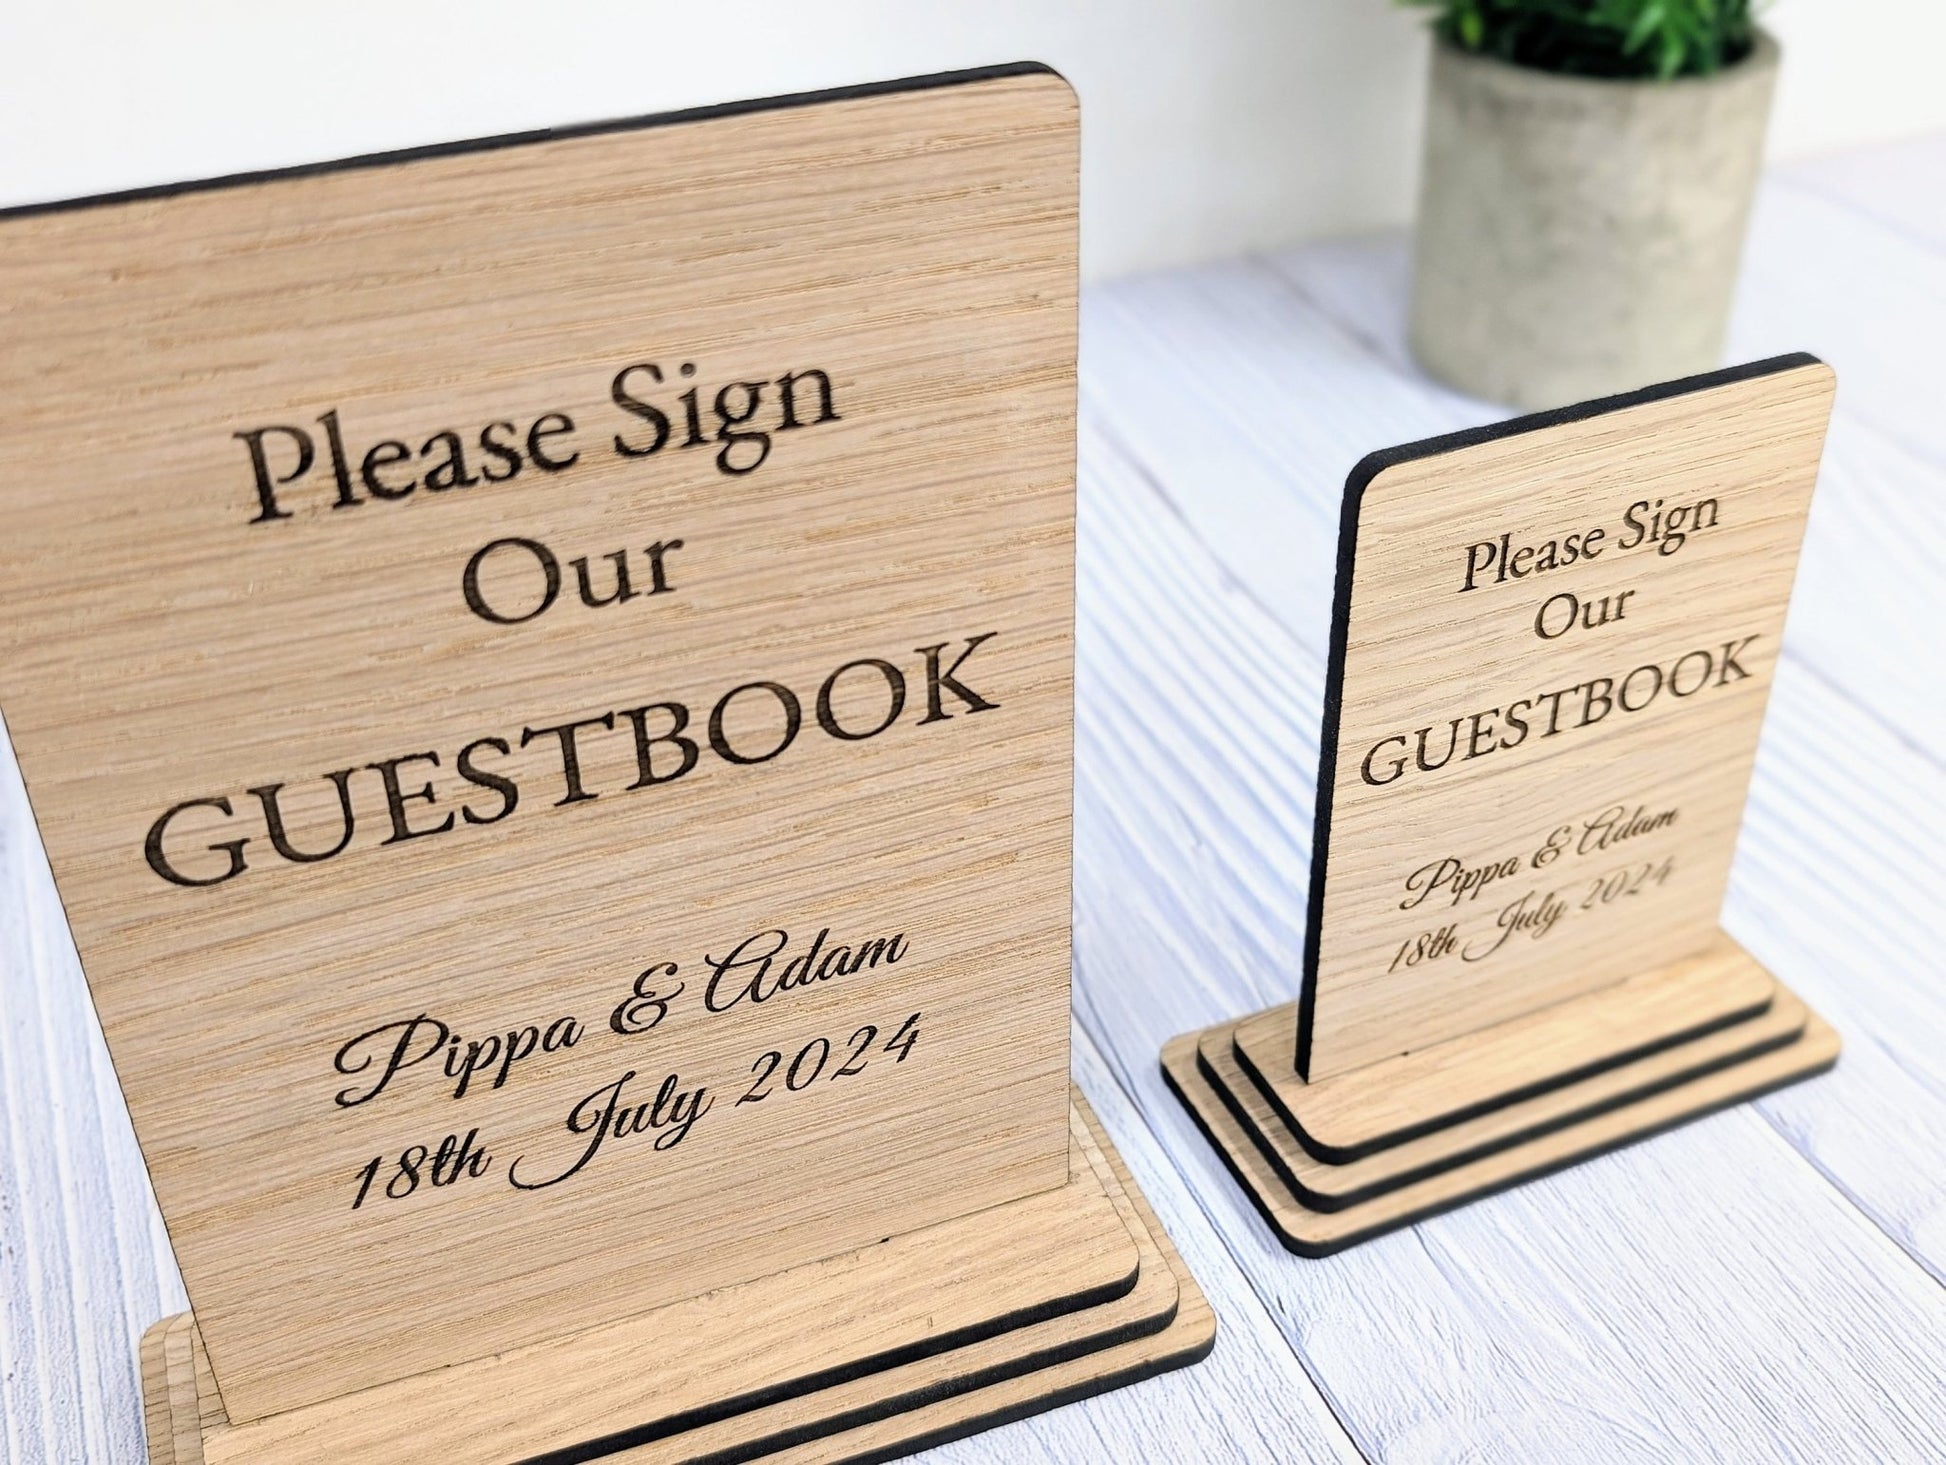 Personalised 'Please Sign Our Guestbook' Wooden Wedding & Party Sign - CherryGroveCraft